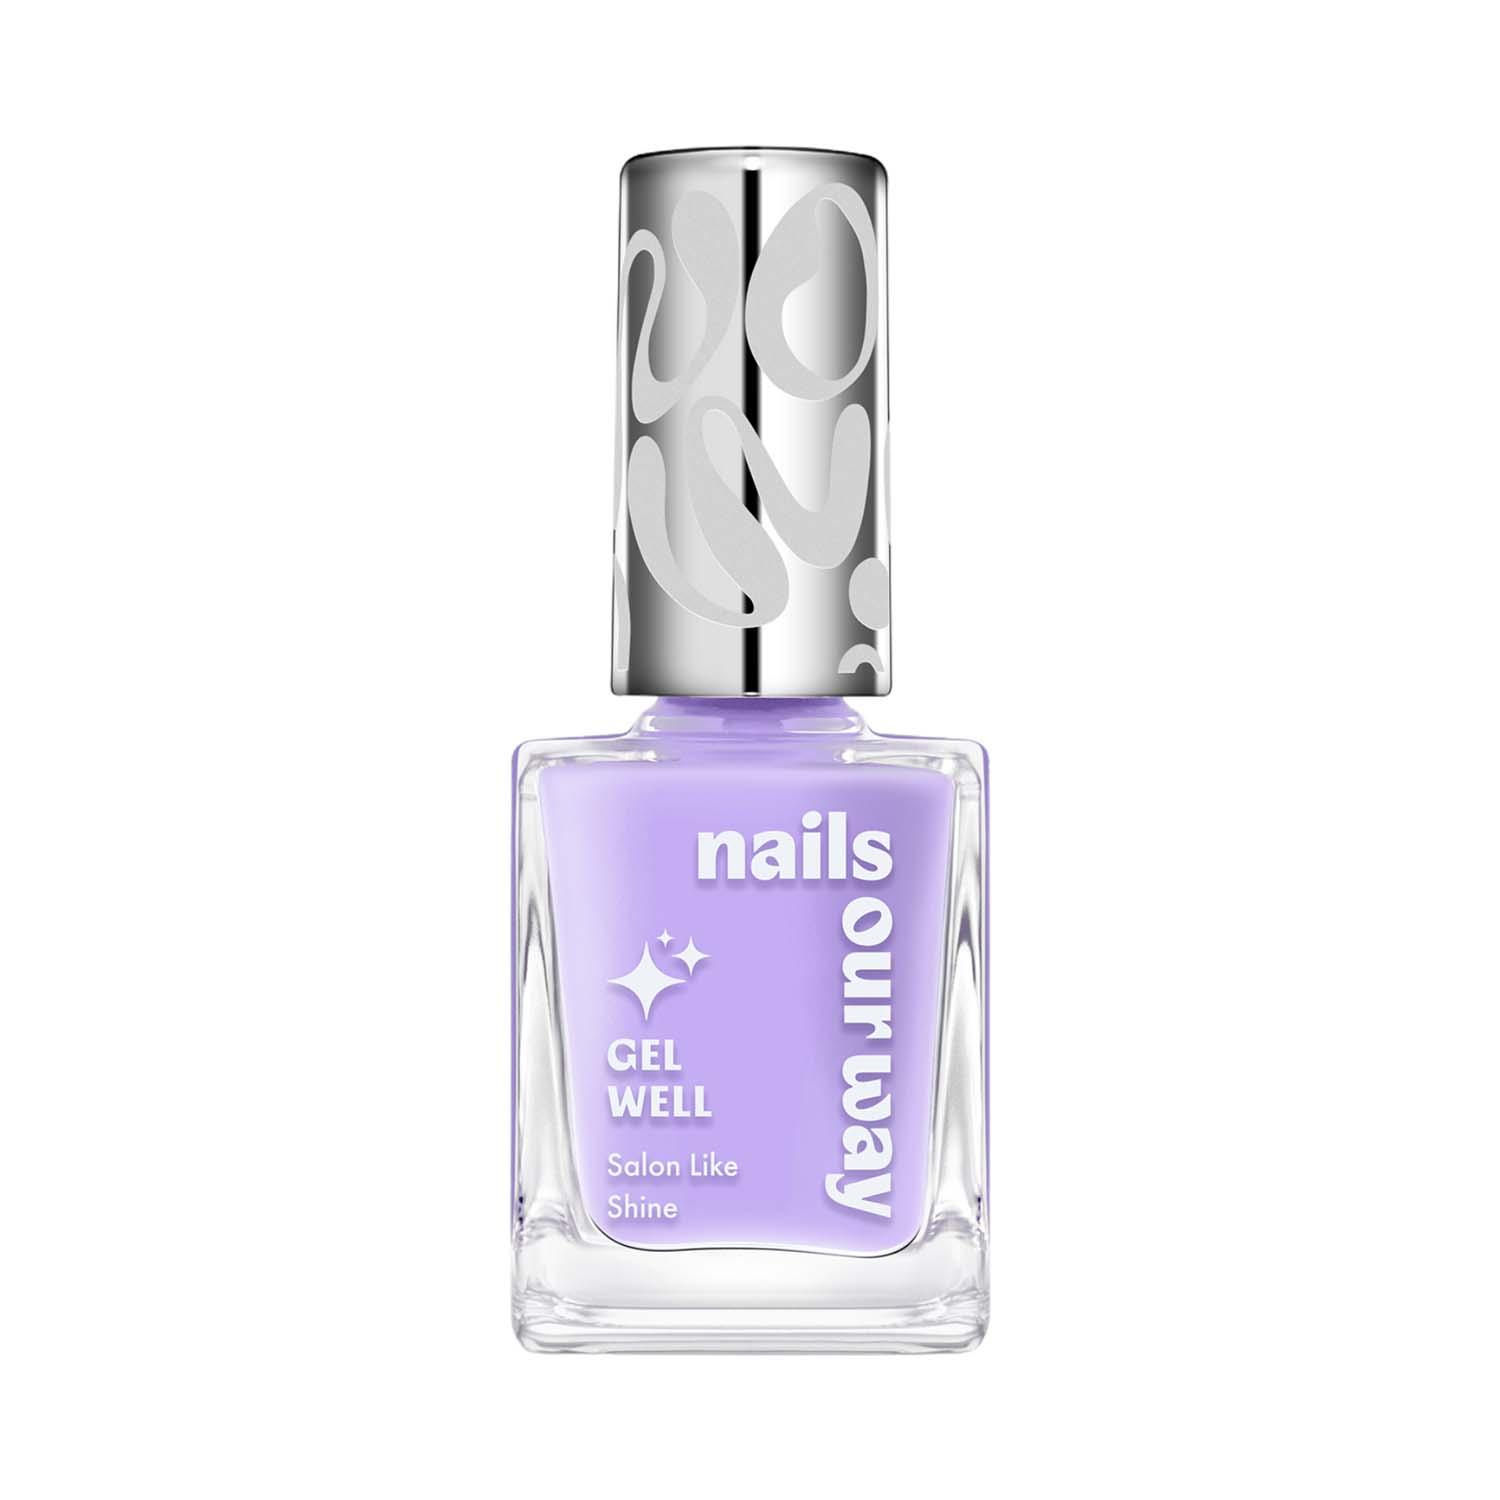 Nails Our Way | Nails Our Way Gel Well Nail Enamel - 213 Optimistic (10 ml)